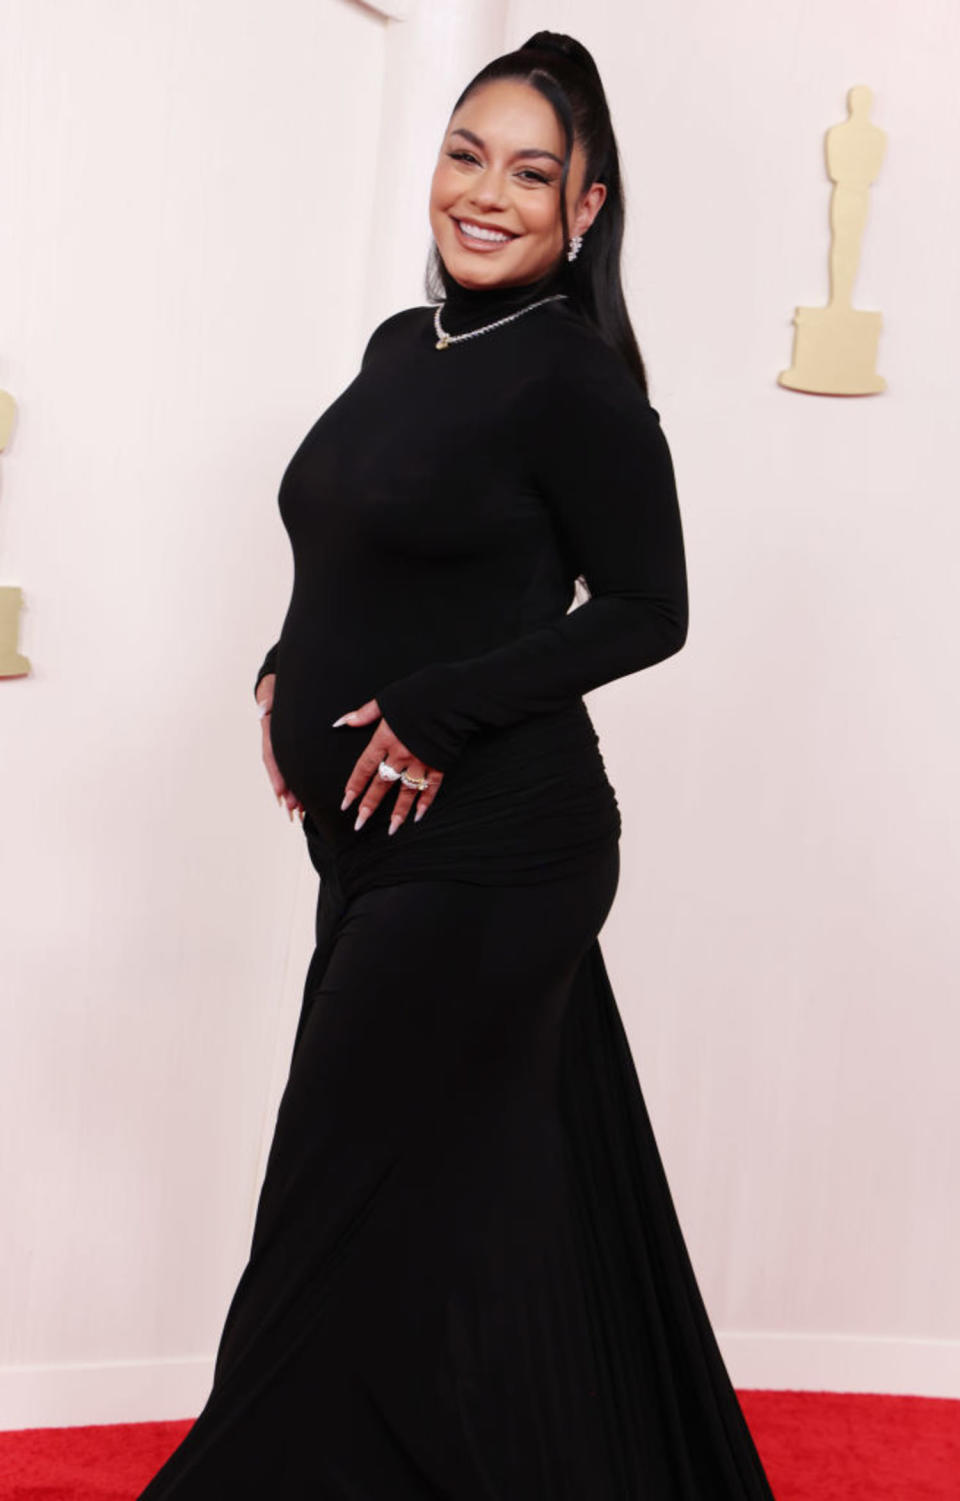 96th Annual Academy Awards - Arrivals (Kevin Mazur / Getty Images)